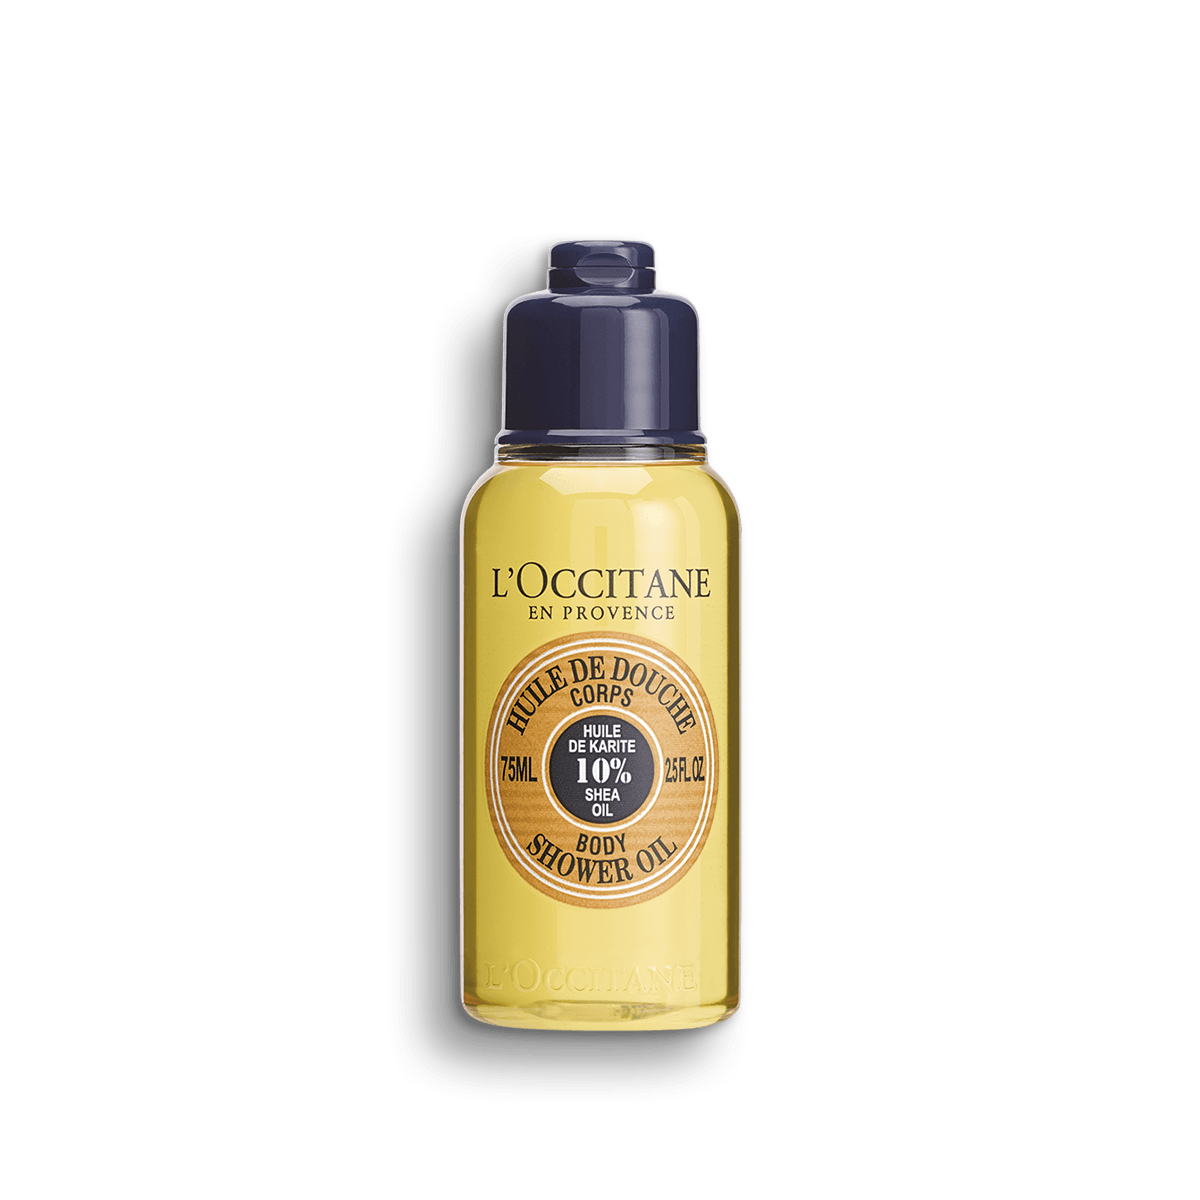 Best Selling Shopify Products on pa.loccitane.com-3